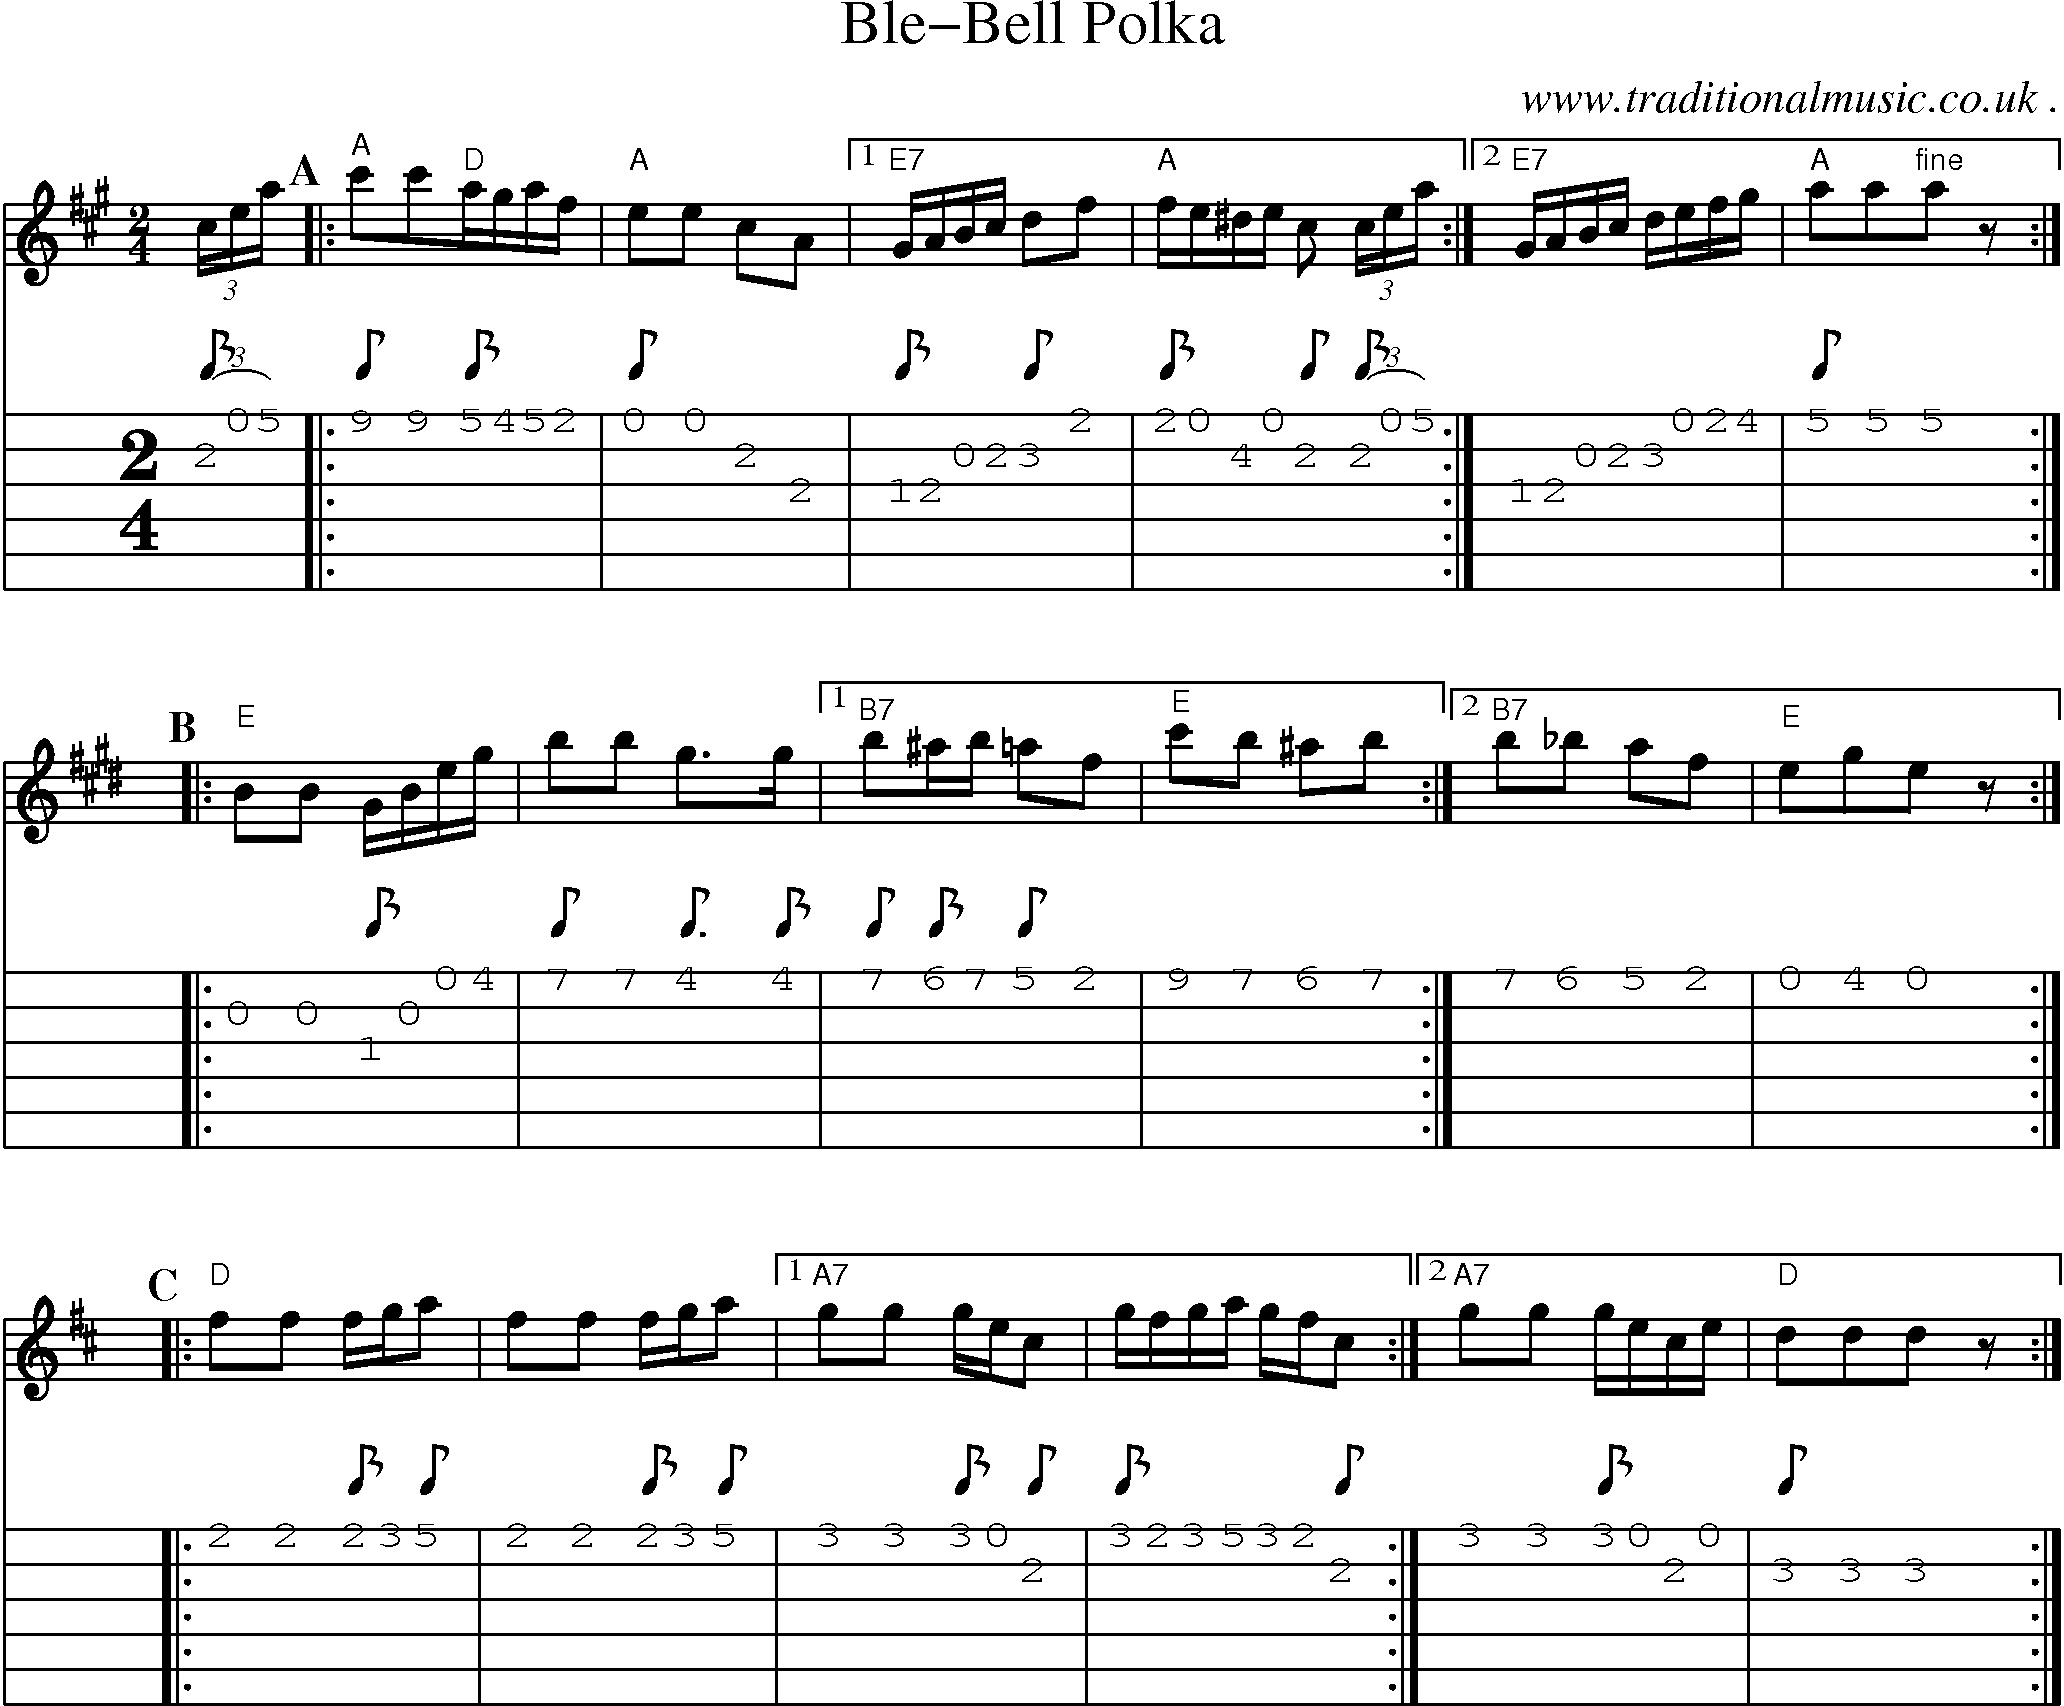 Sheet-Music and Guitar Tabs for Ble-bell Polka